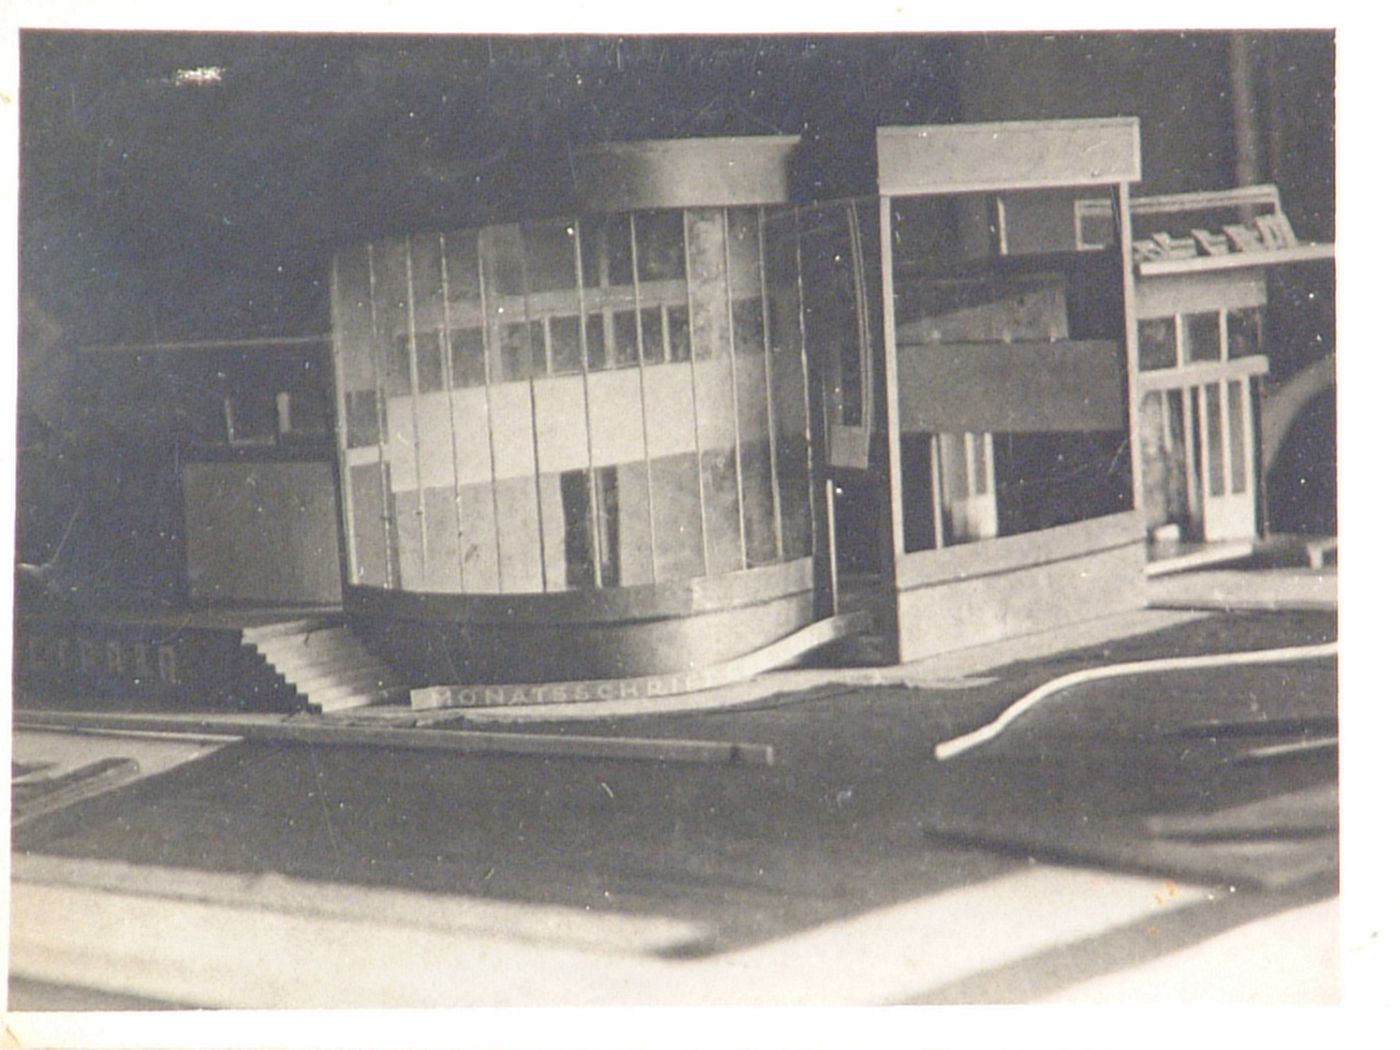 Photograph of a model for a house attributed to Lissitzky